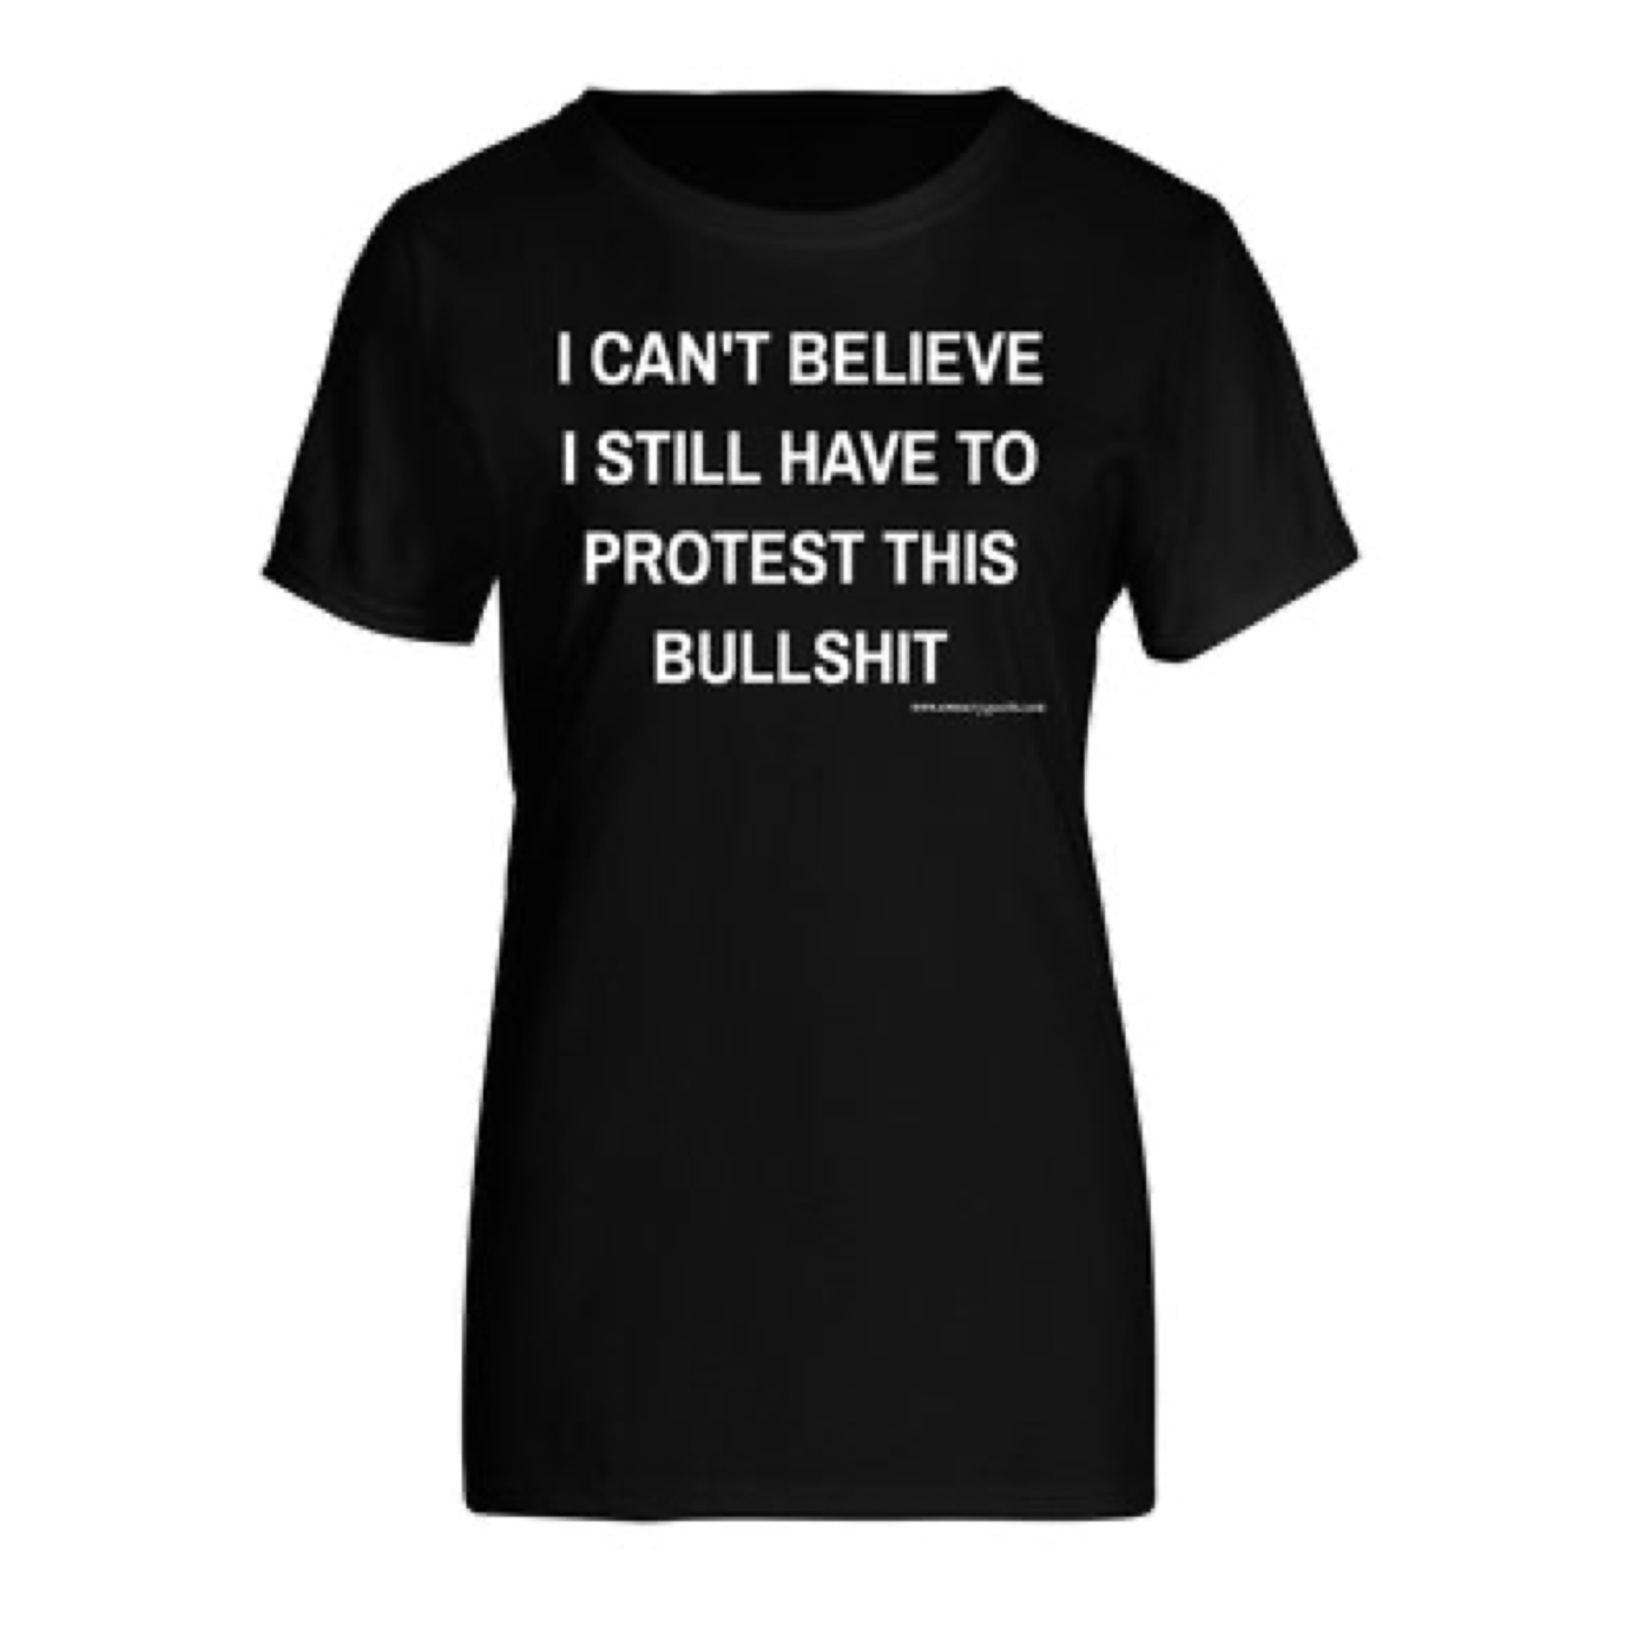 Bad Annie’s T-Shirt - I Can’t Believe Protest This Bullshit